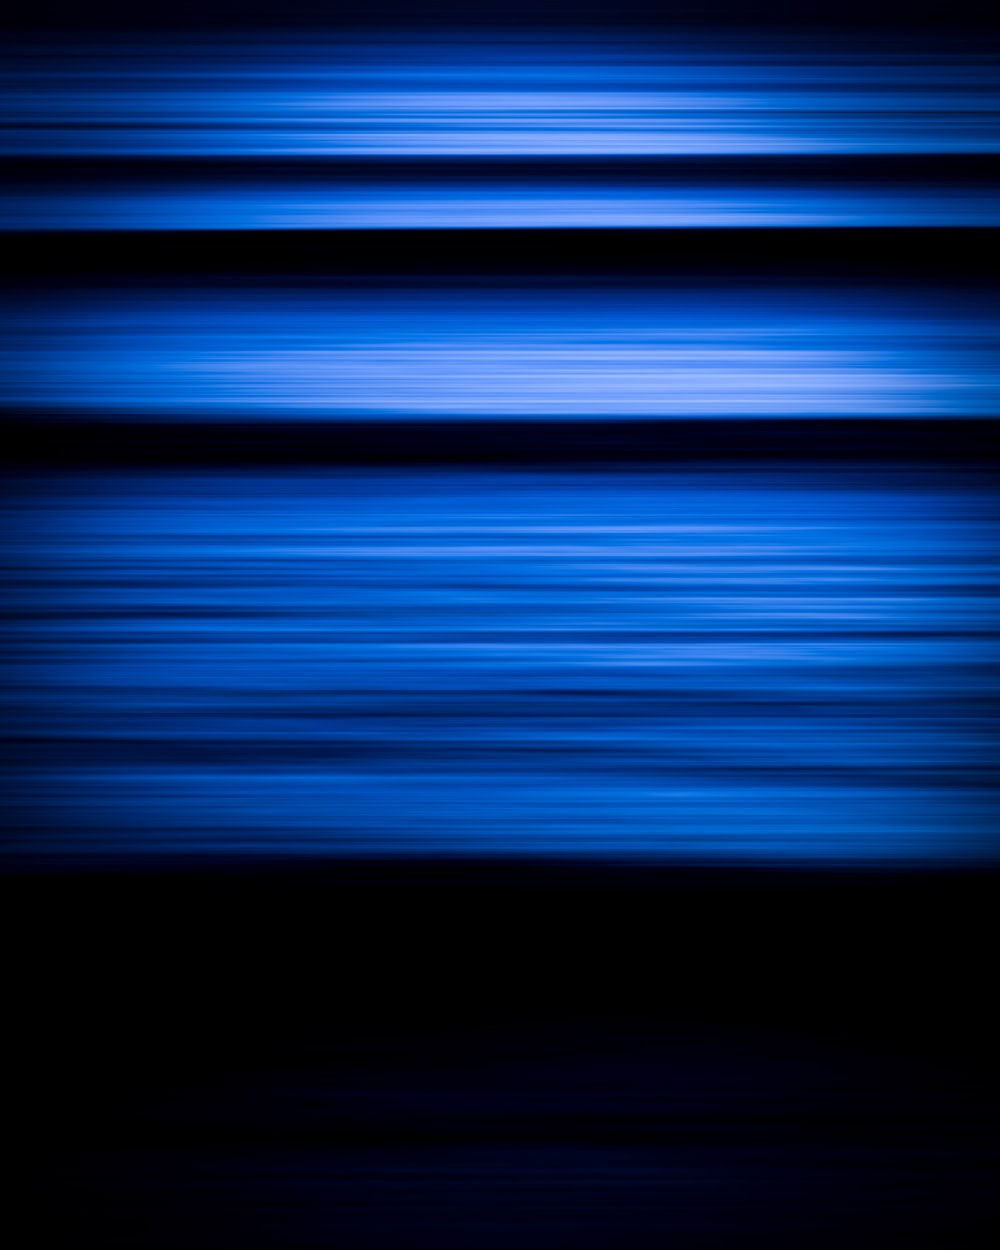 Blue Light Picture. Download Free Image